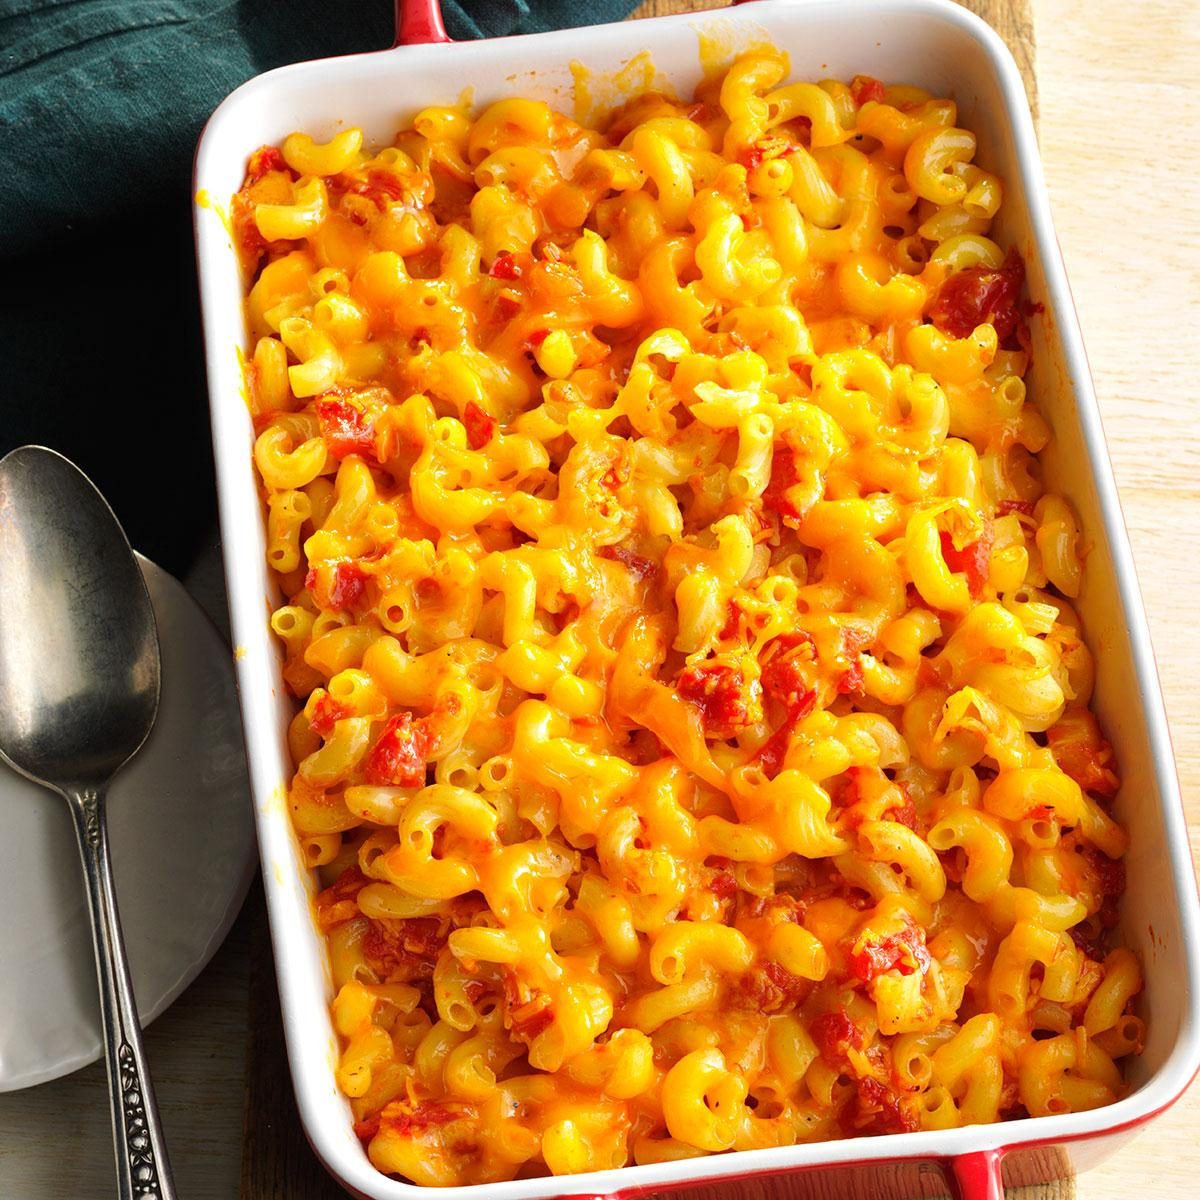 What is the best macaroni and cheese recipe?